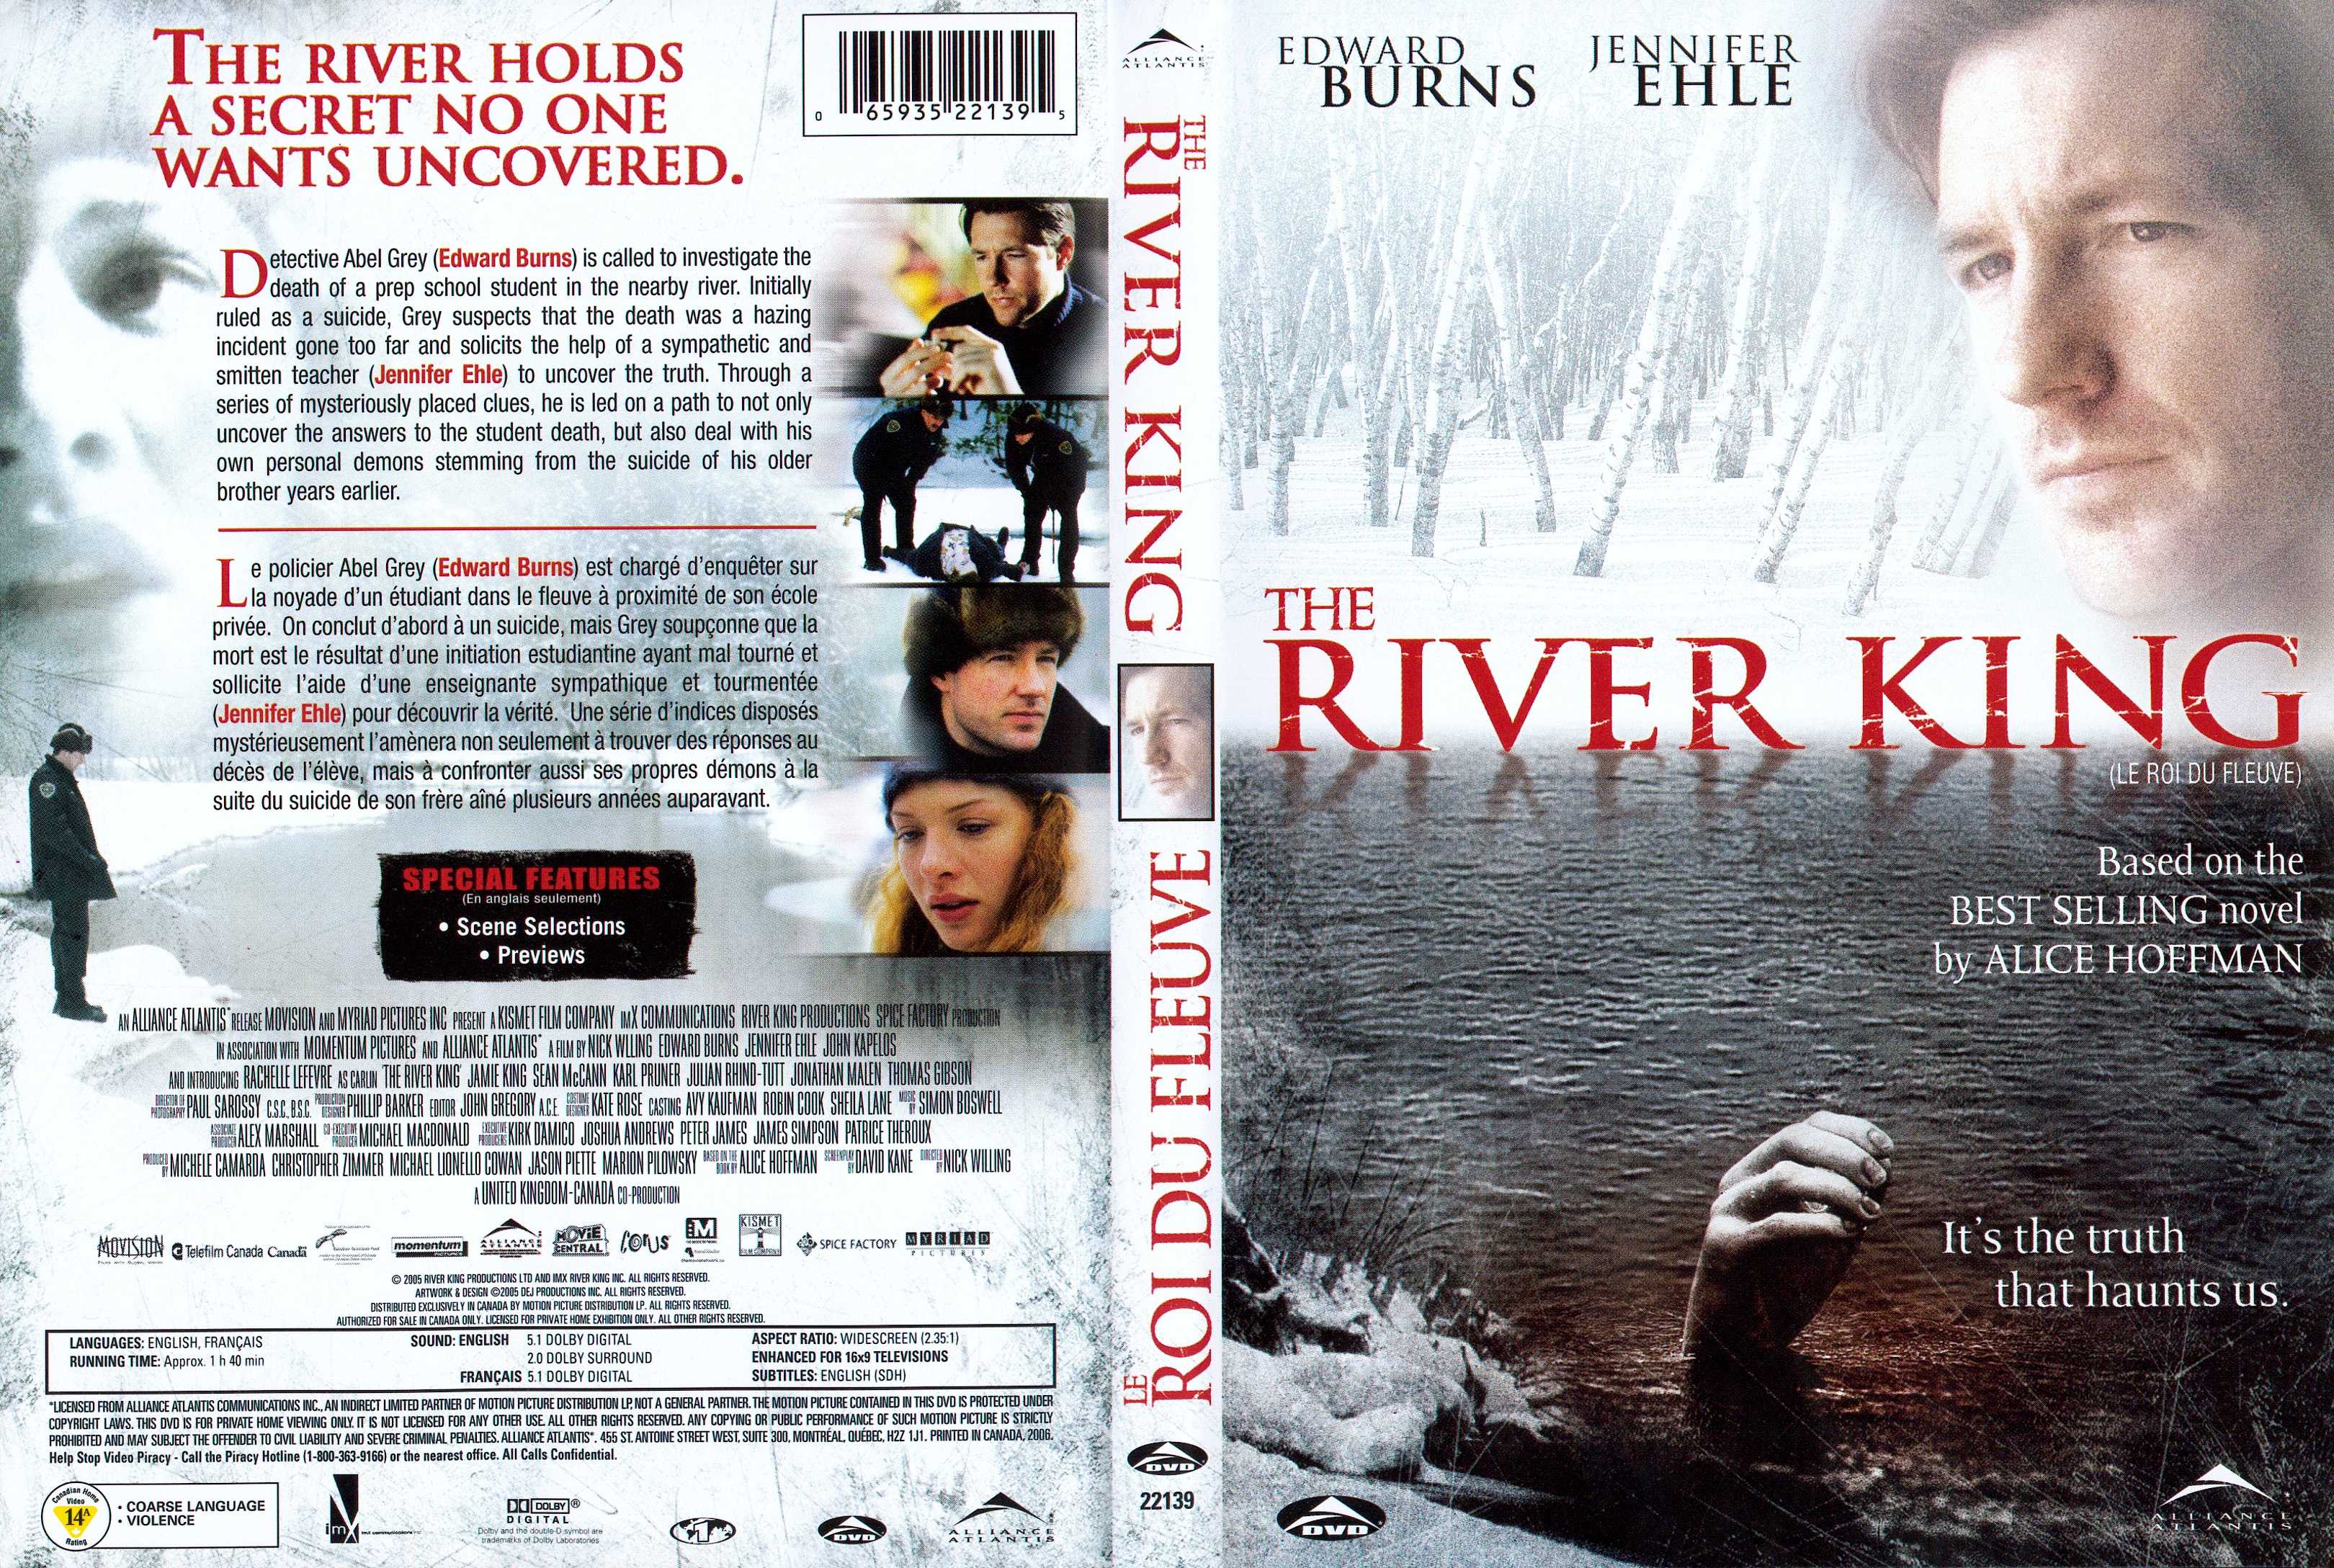 Jaquette DVD The river king